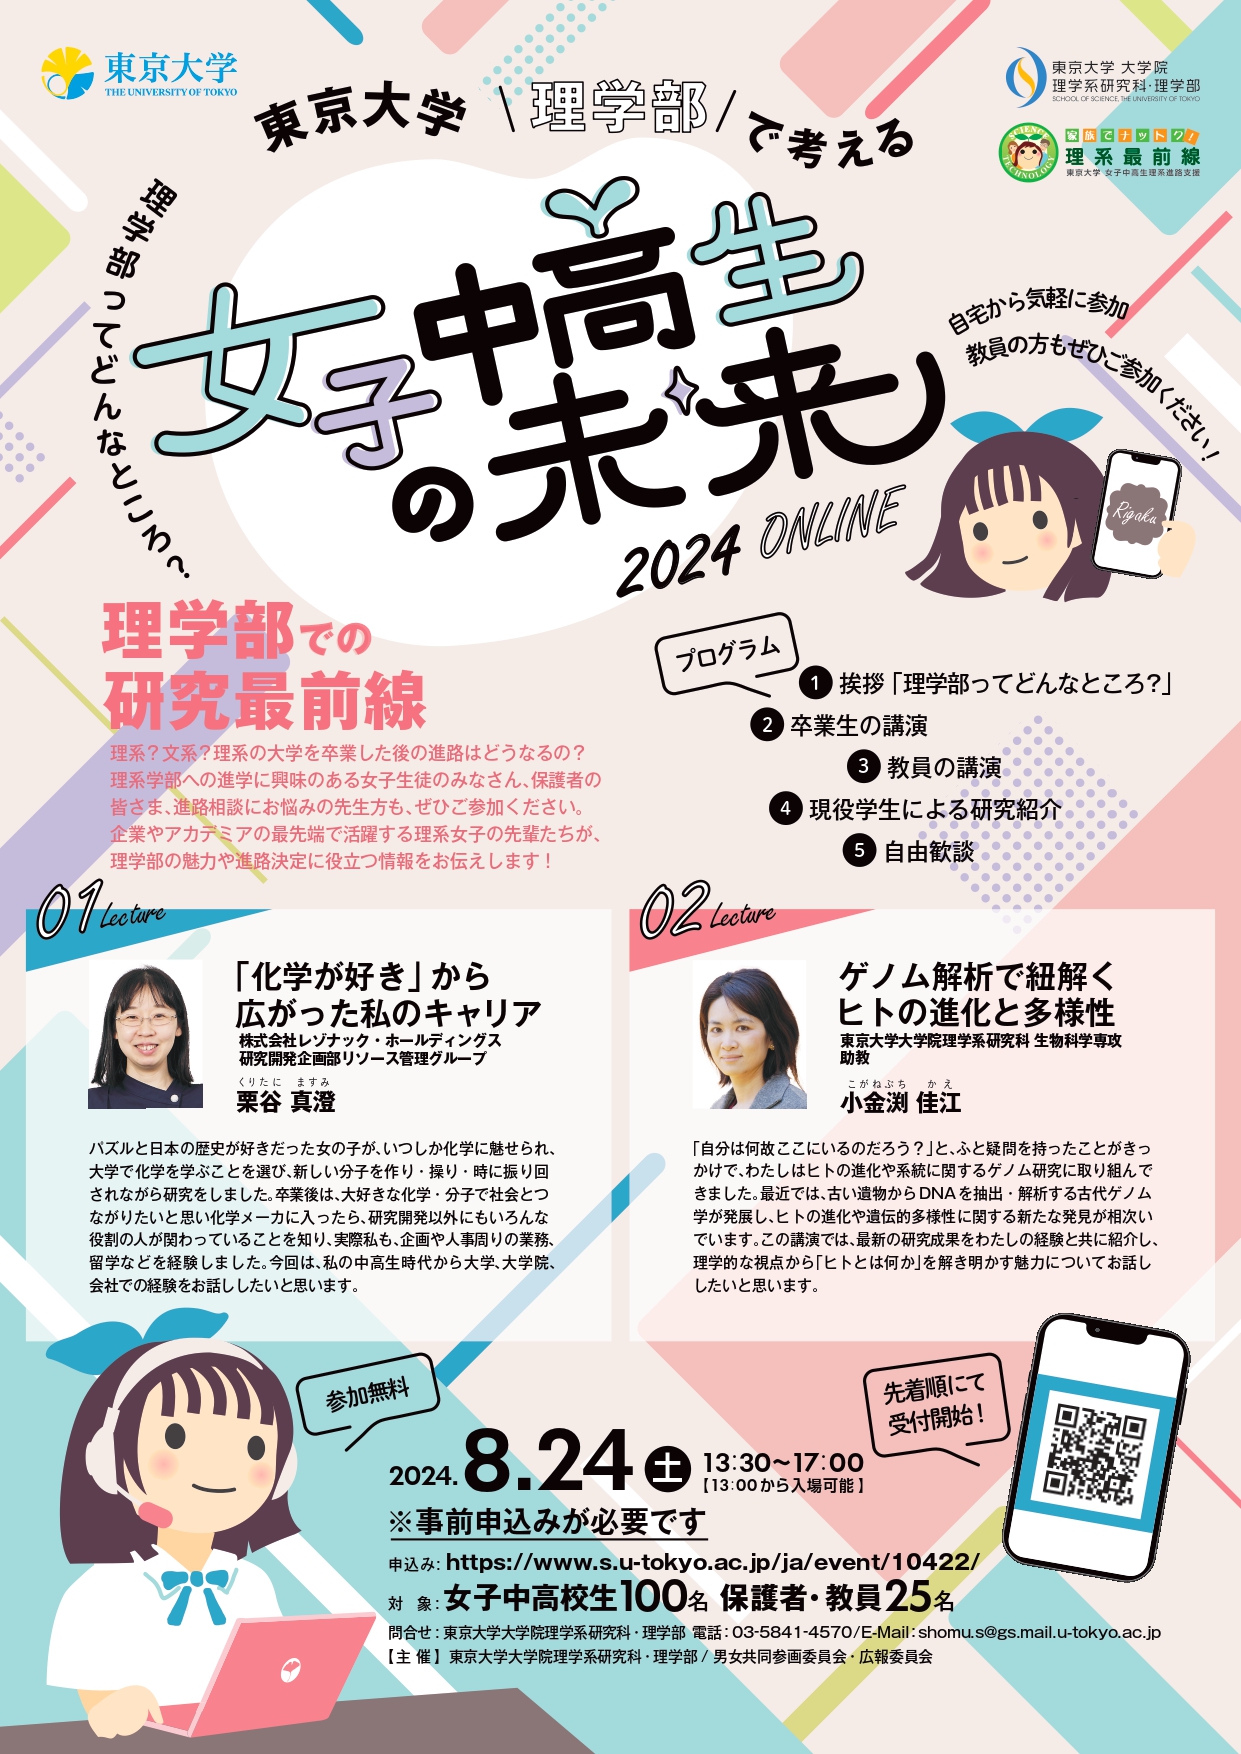 The Future of Female Junior High and High School Students at the Faculty of Science, University of Tokyo 2024 ONLINE